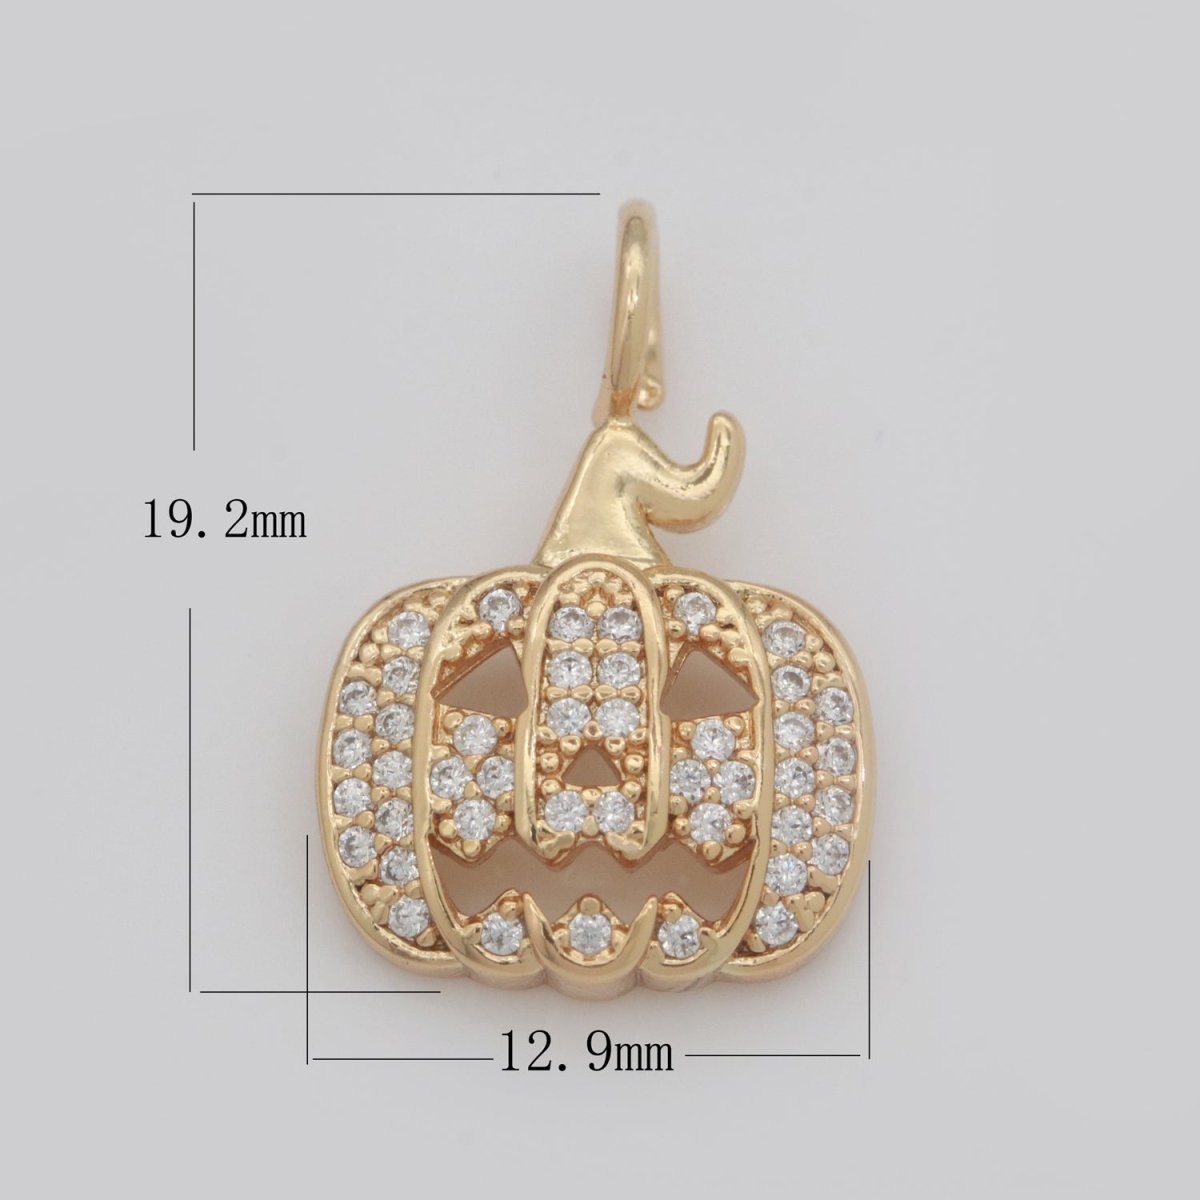 18K Gold Filled Jack O Lantern Charms, Pumpkin Charm, Scary Halloween Jewelry Inspired Add on Charm for Necklace Earring Bracelet M-739 - DLUXCA